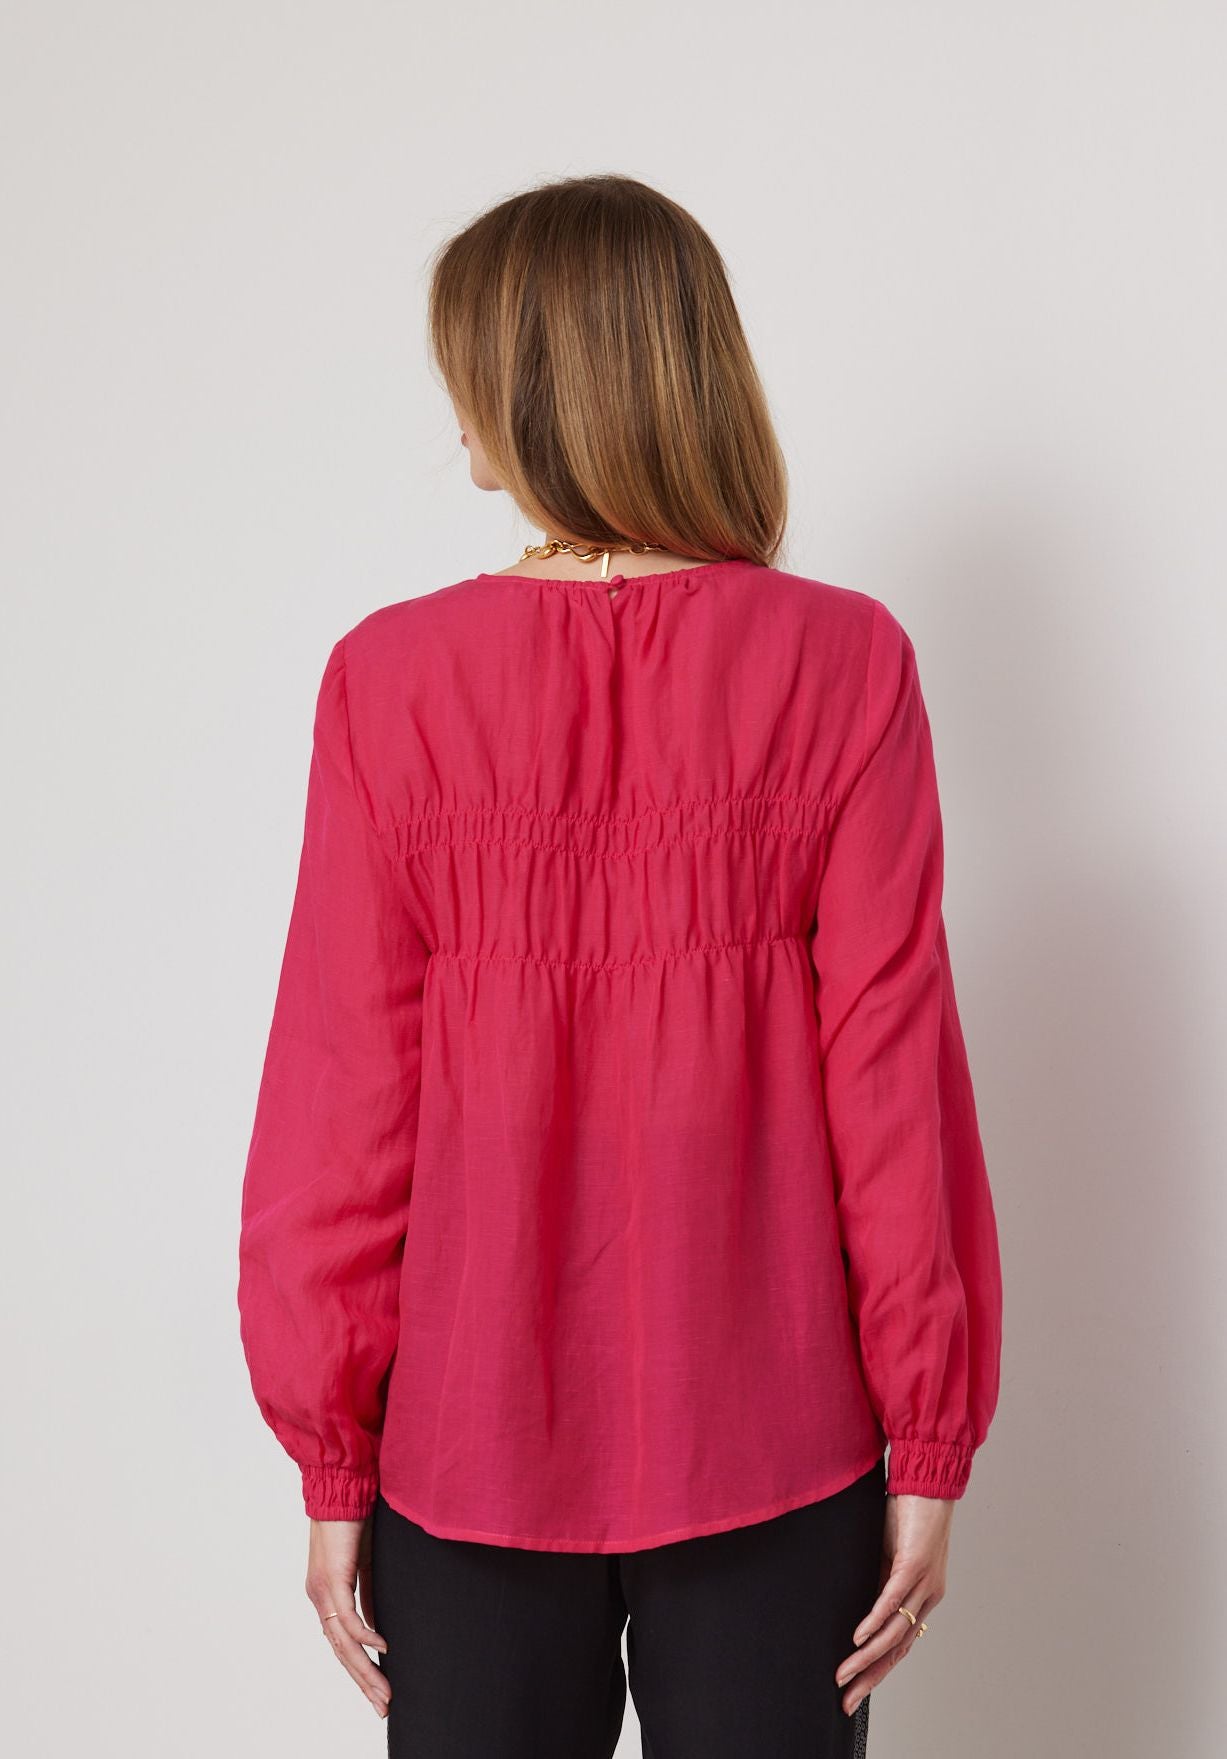 DUO MELINE SHIRRED TOP - HOT PINK - THE VOGUE STORE